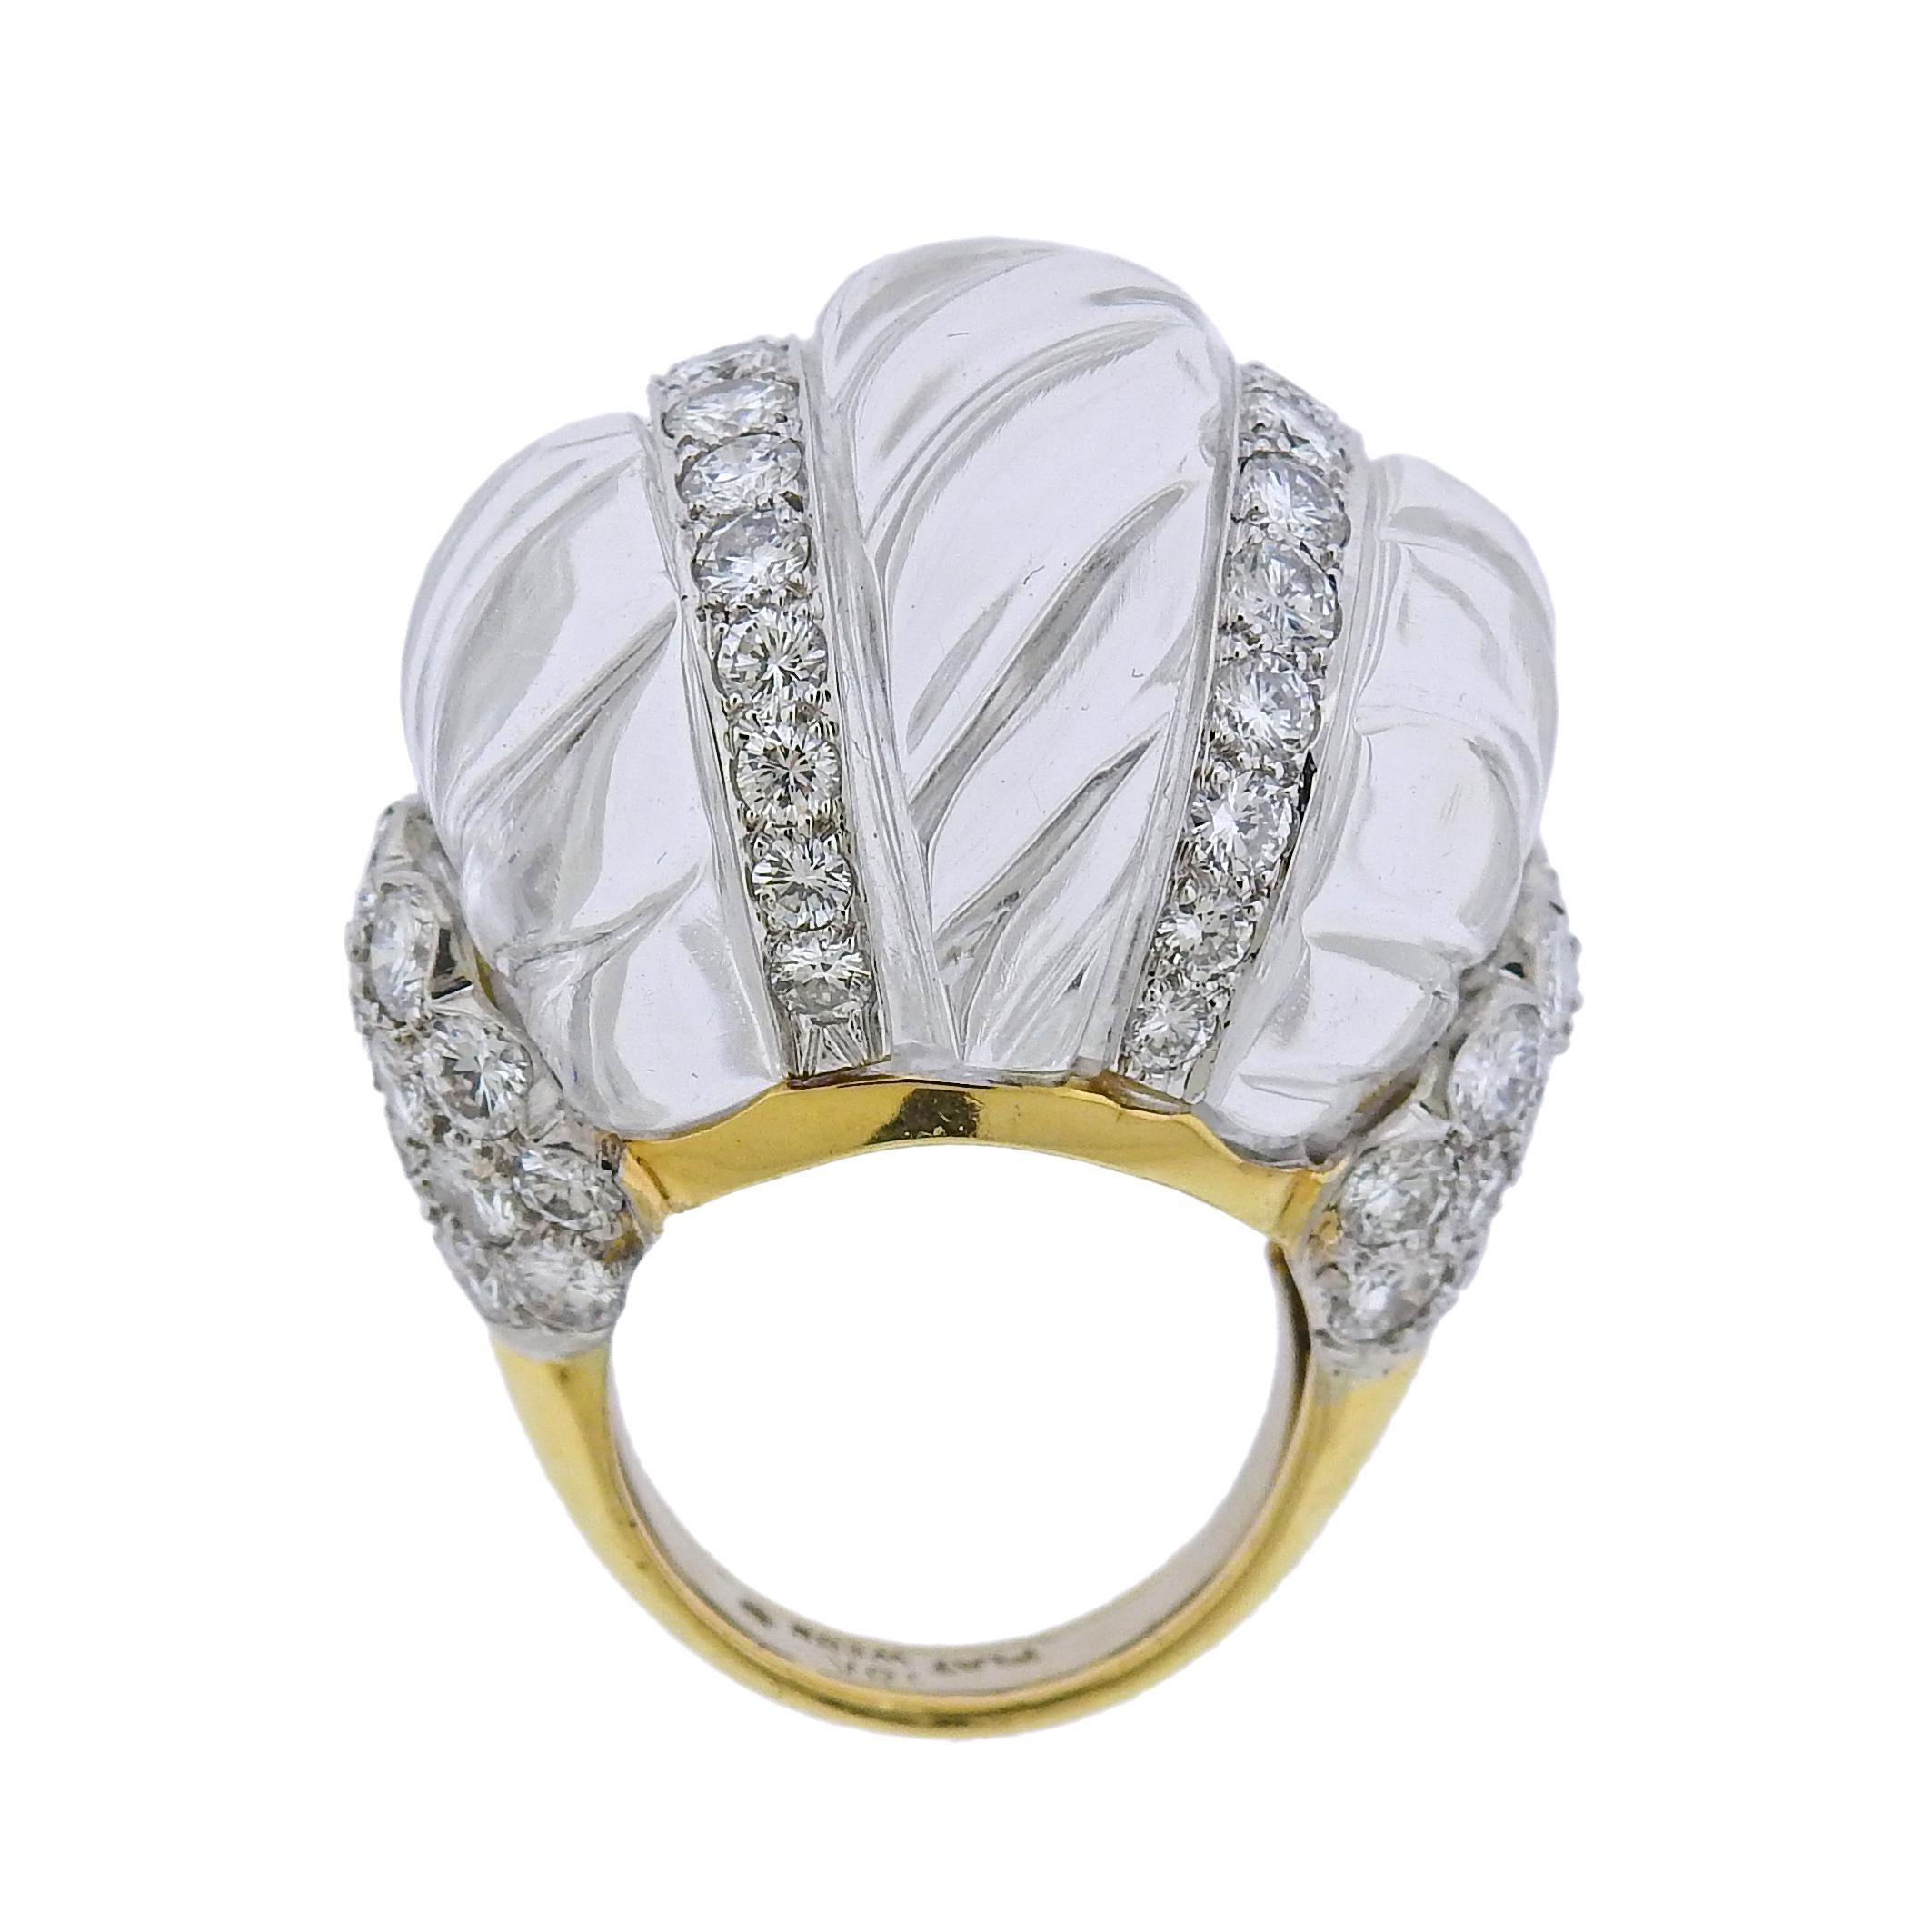 Impressive David Webb cocktail ring, set in platinum and 18k yellow gold, featuring carved rock crystal and approx. 4.00ctw in VS-SI/H diamonds.  Retail $36000. Ring size - 5.5, ring top is 23mm x 29mm, sits approx. 20mm from the top of the finger.